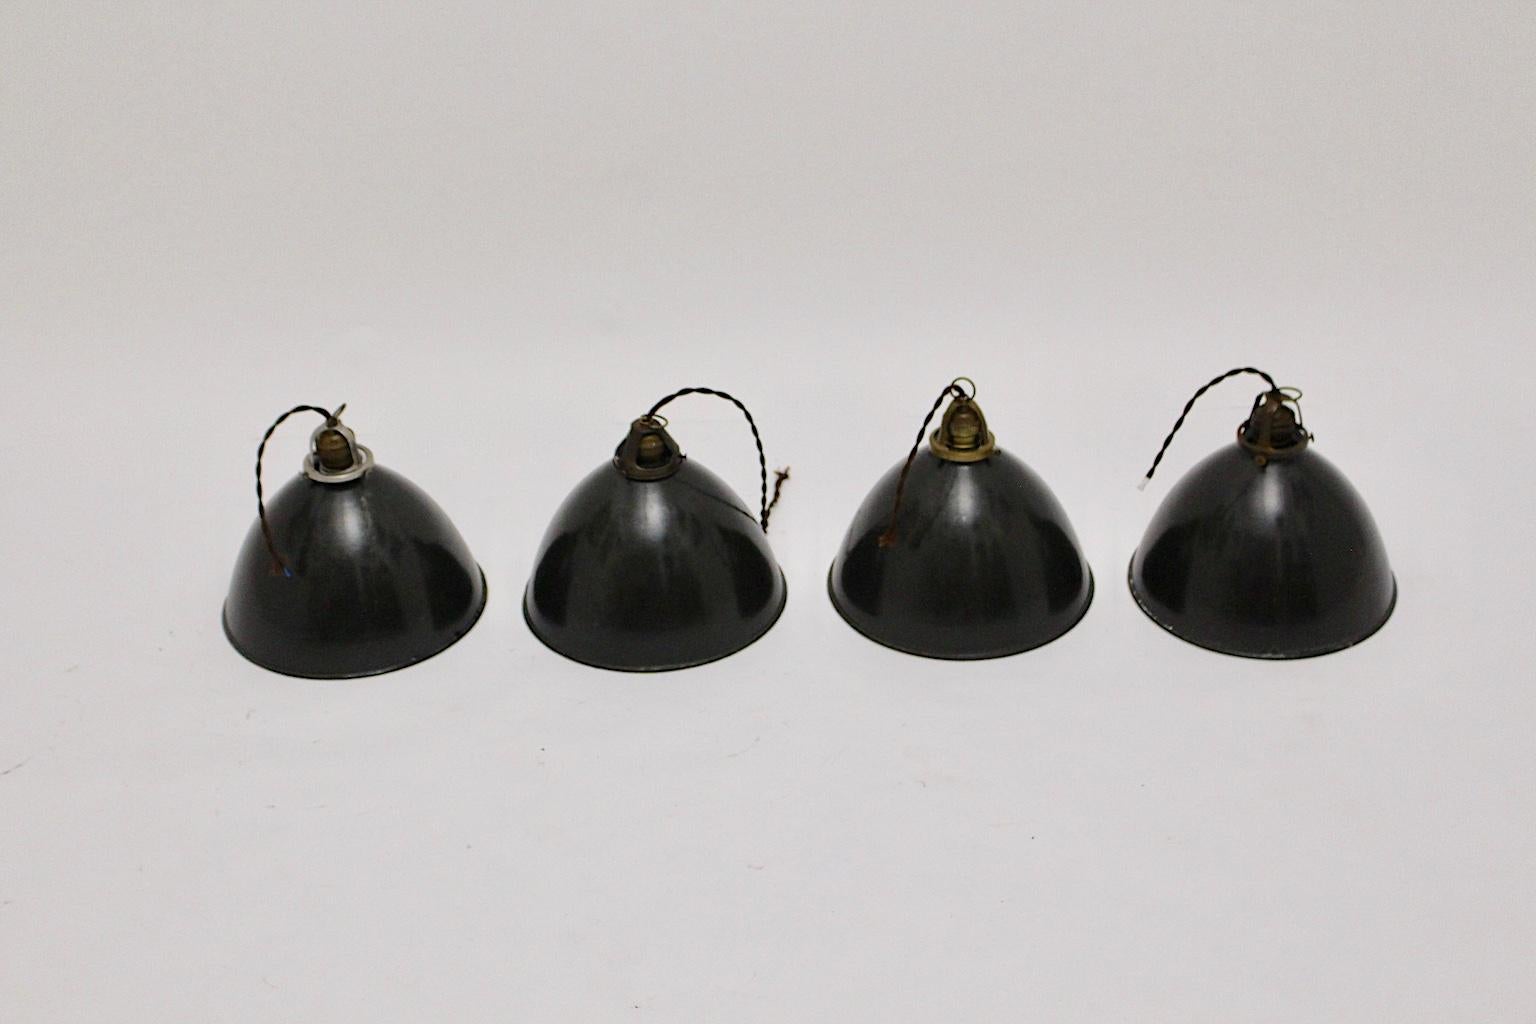 Bauhaus Black and White Vintage Set of four Email Hanging Lamps, 1920s, Germany In Good Condition For Sale In Vienna, AT